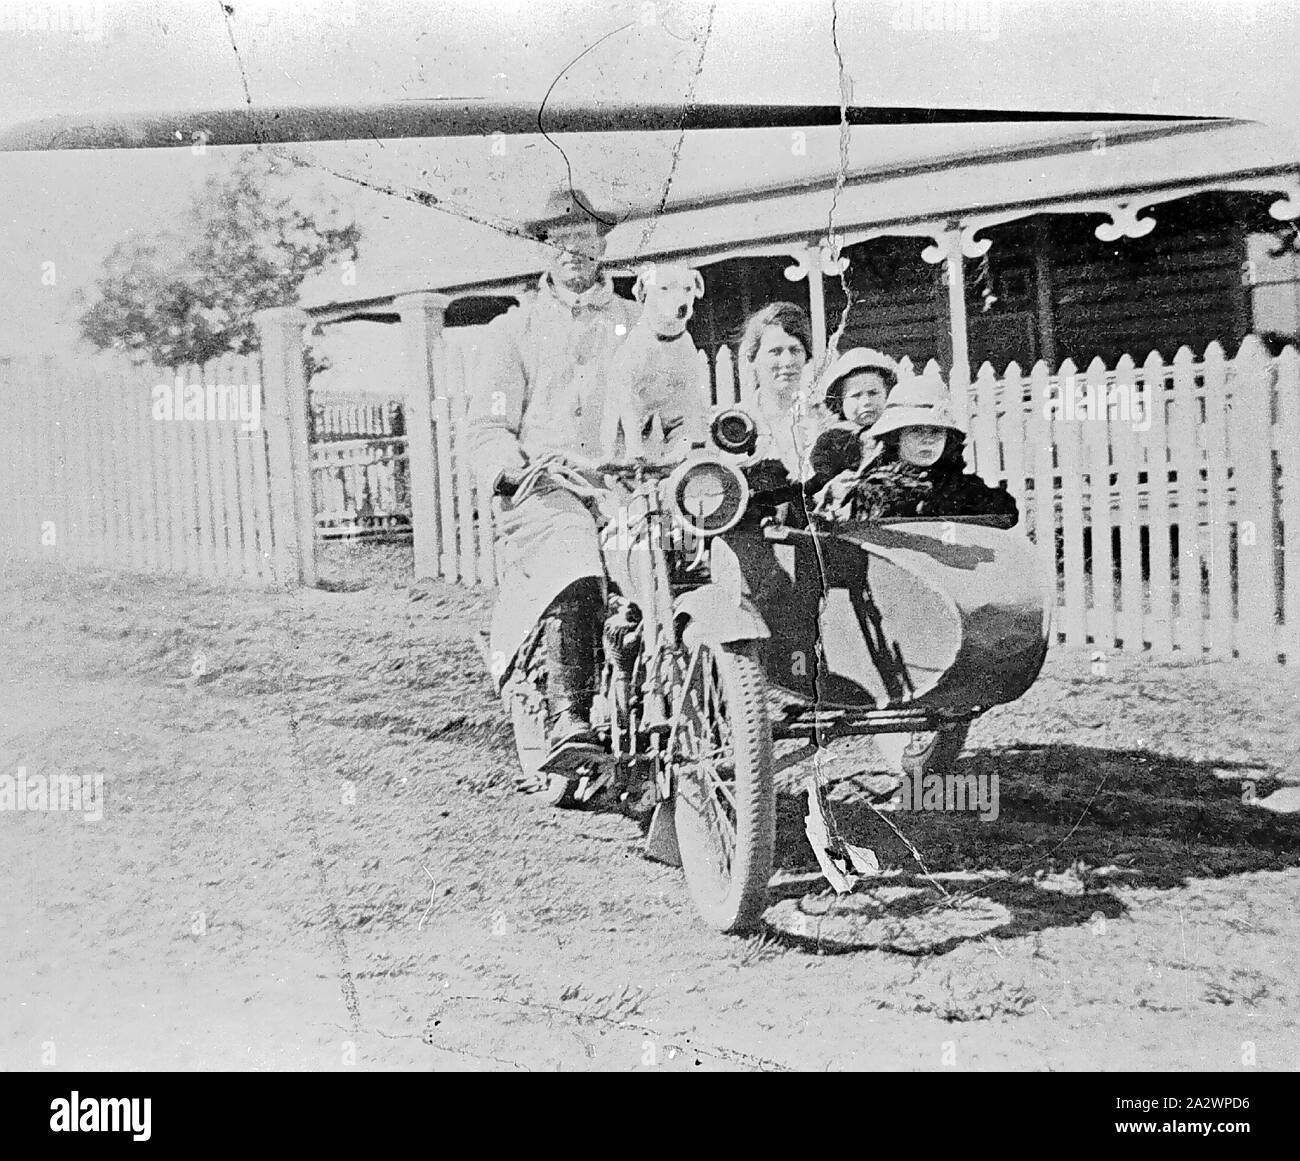 Negative - Stroud, New South Wales, 1919, A Baptist minister, his daughters and his sister in a motorbike and sidecar. A dog sits on the front of the bike. The Baptist manse is in the background Stock Photo